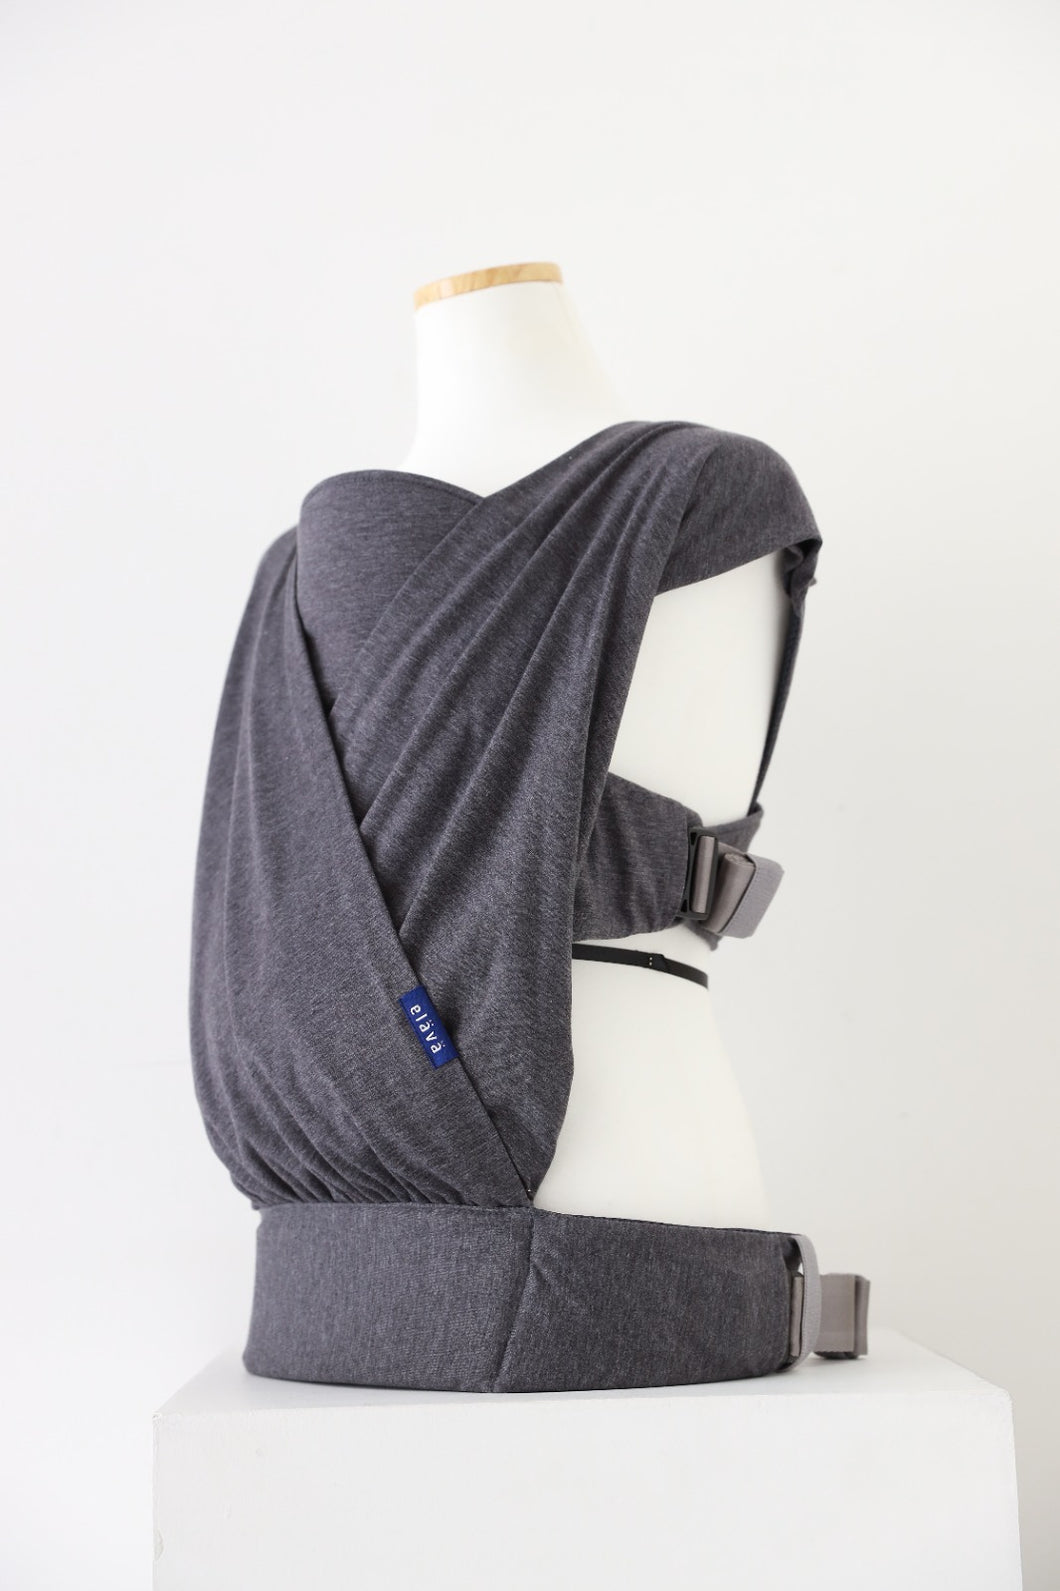 [ Elava ] Baby Carrier Support Sling